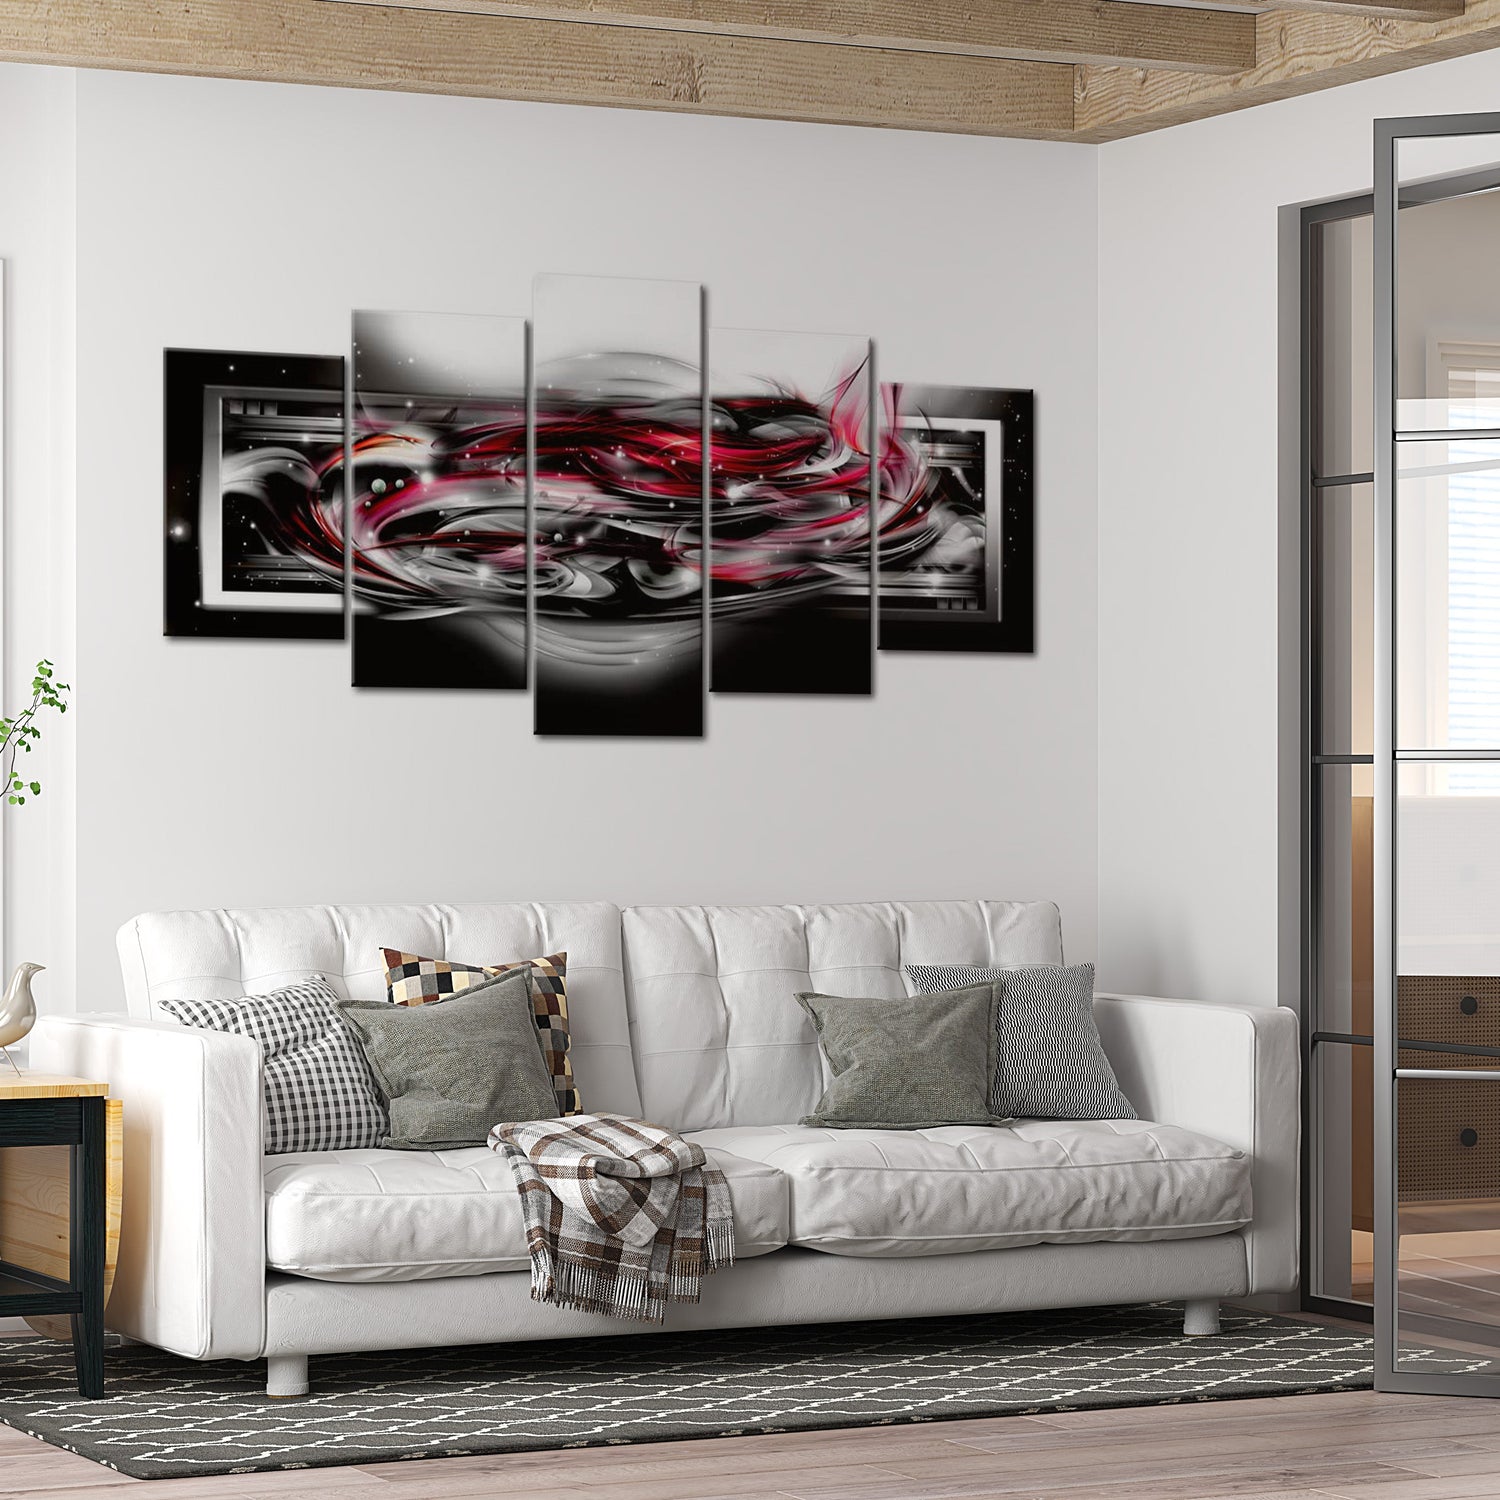 Glamour Canvas Wall Art - Carmine Ribbons - 5 Pieces